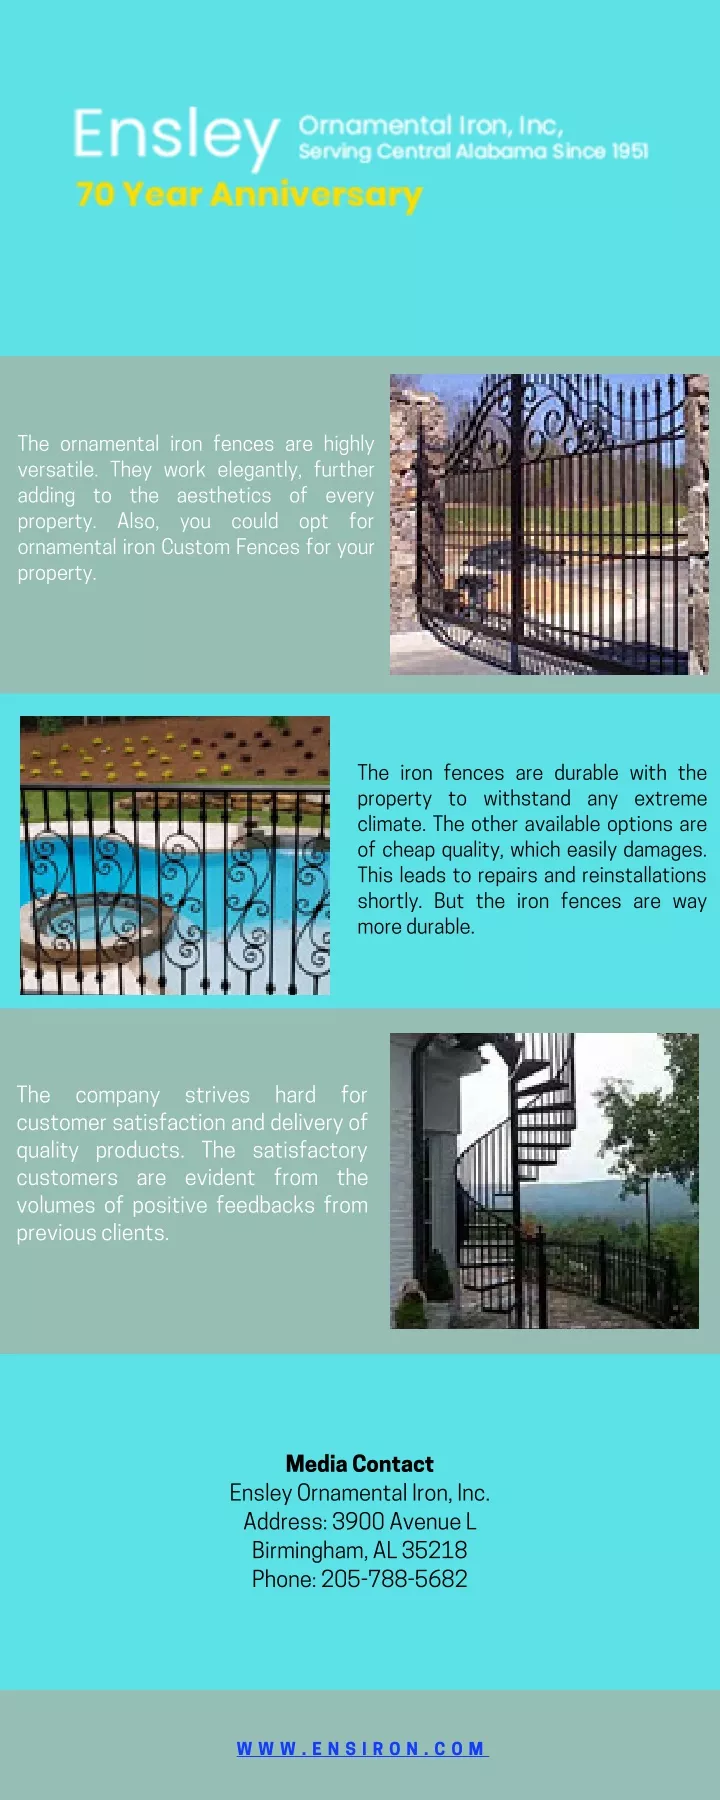 the ornamental iron fences are highly versatile